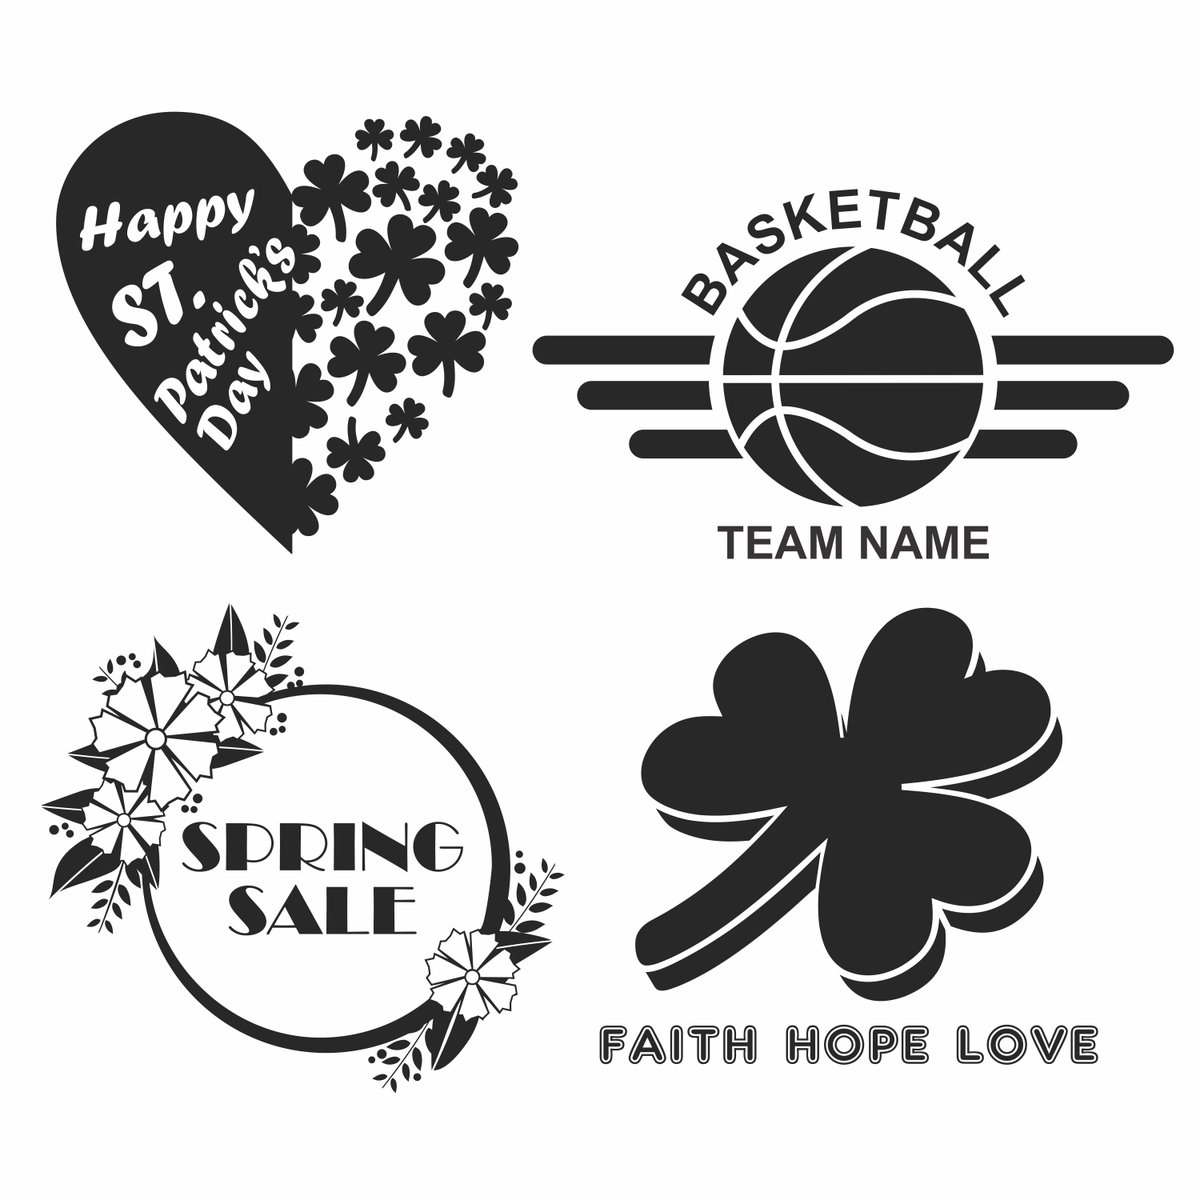 Check out this month's FREE #engraving clipart #stpatricksday, #basketball, and more. Click the link below to download now.
visionengravers.com/support/vision…

#freeclipart #freegraphcis #vectorart #engraving #routing #cnc #visionengravers #visionfreeclipart #madeinusa #madewithvision